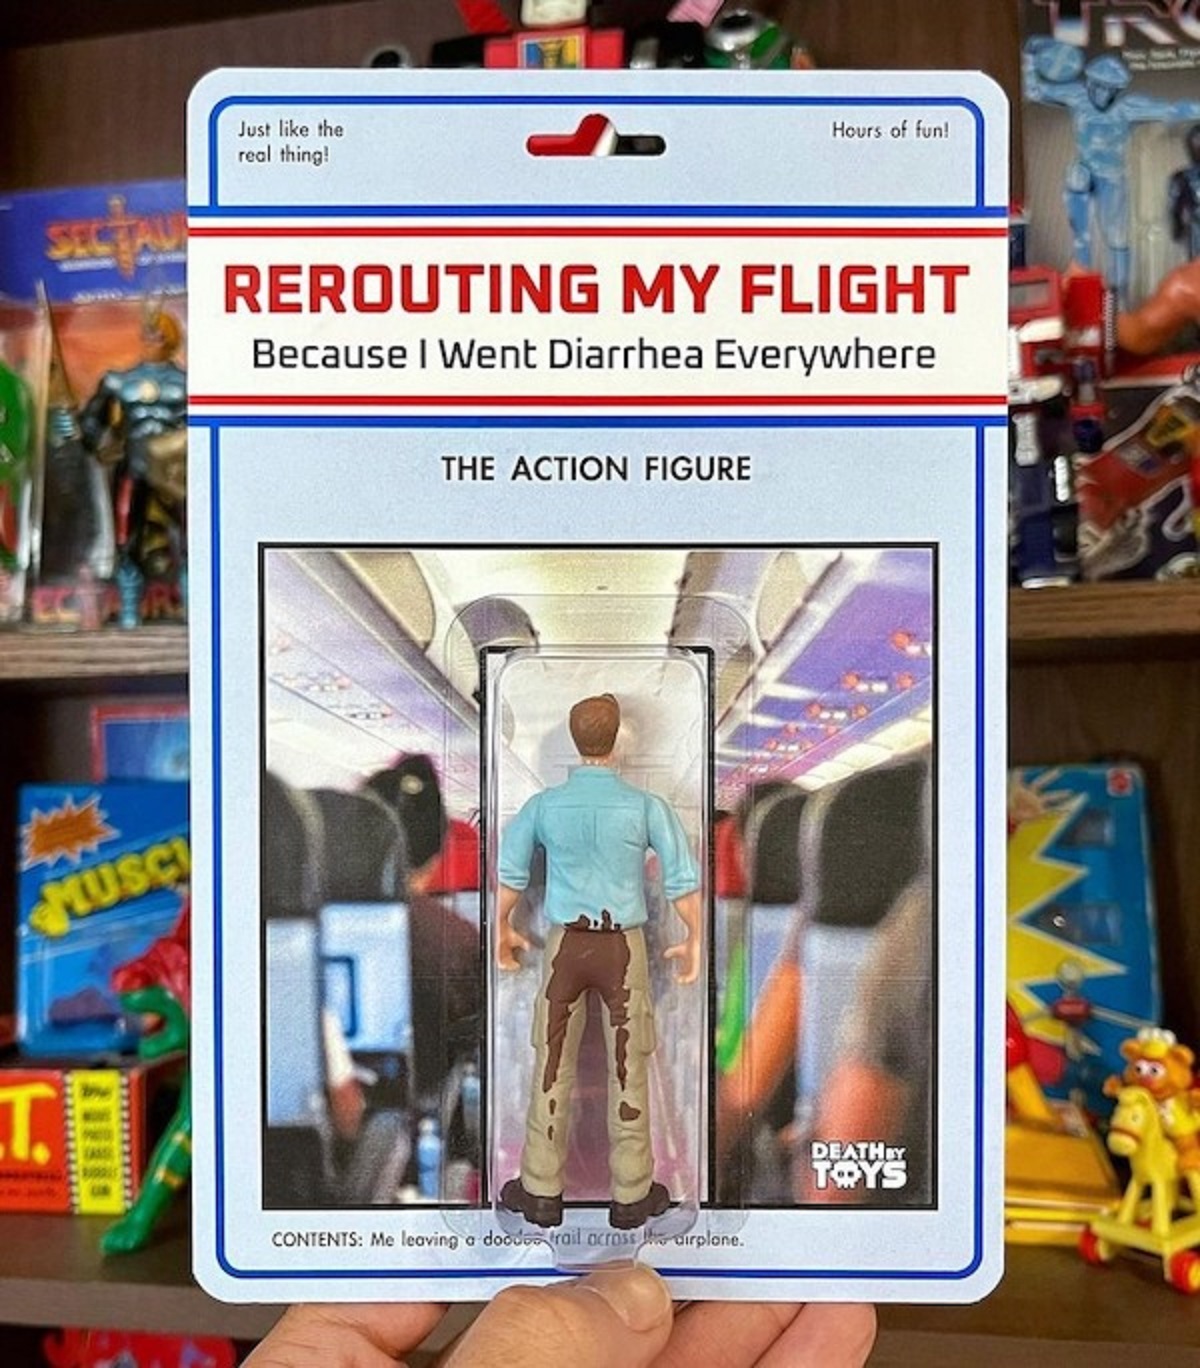 action figure - Musc T. Just the real thing! Rerouting My Flight Because I Went Diarrhea Everywhere The Action Figure Hours of fun Contents Me leaving e doce vai ar plane Deathry Toys